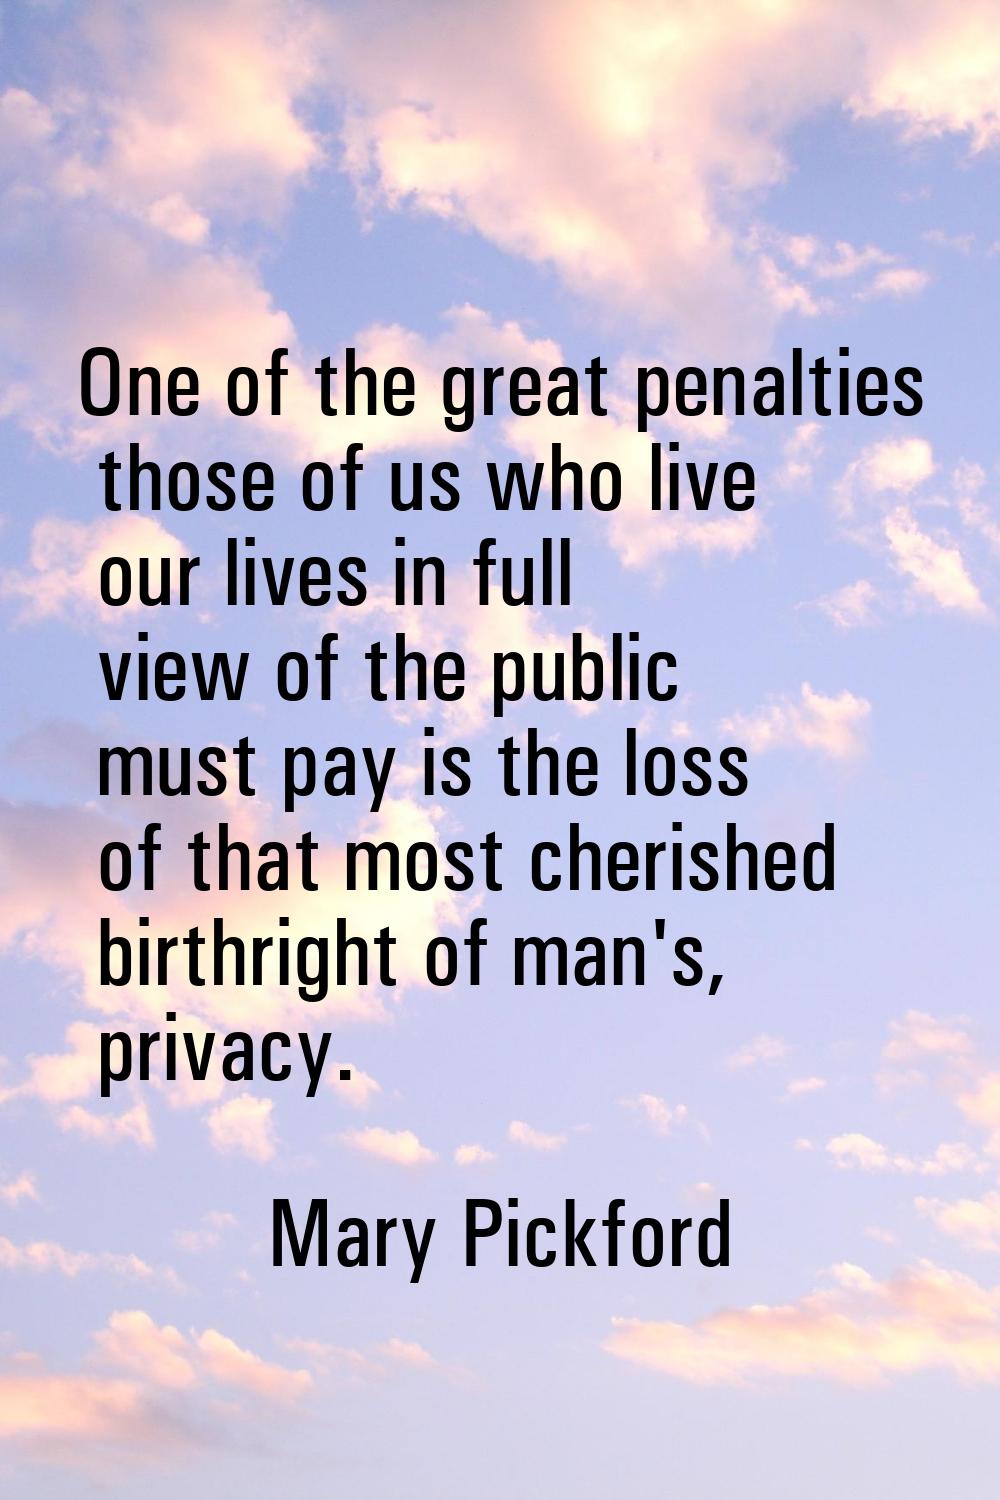 One of the great penalties those of us who live our lives in full view of the public must pay is th